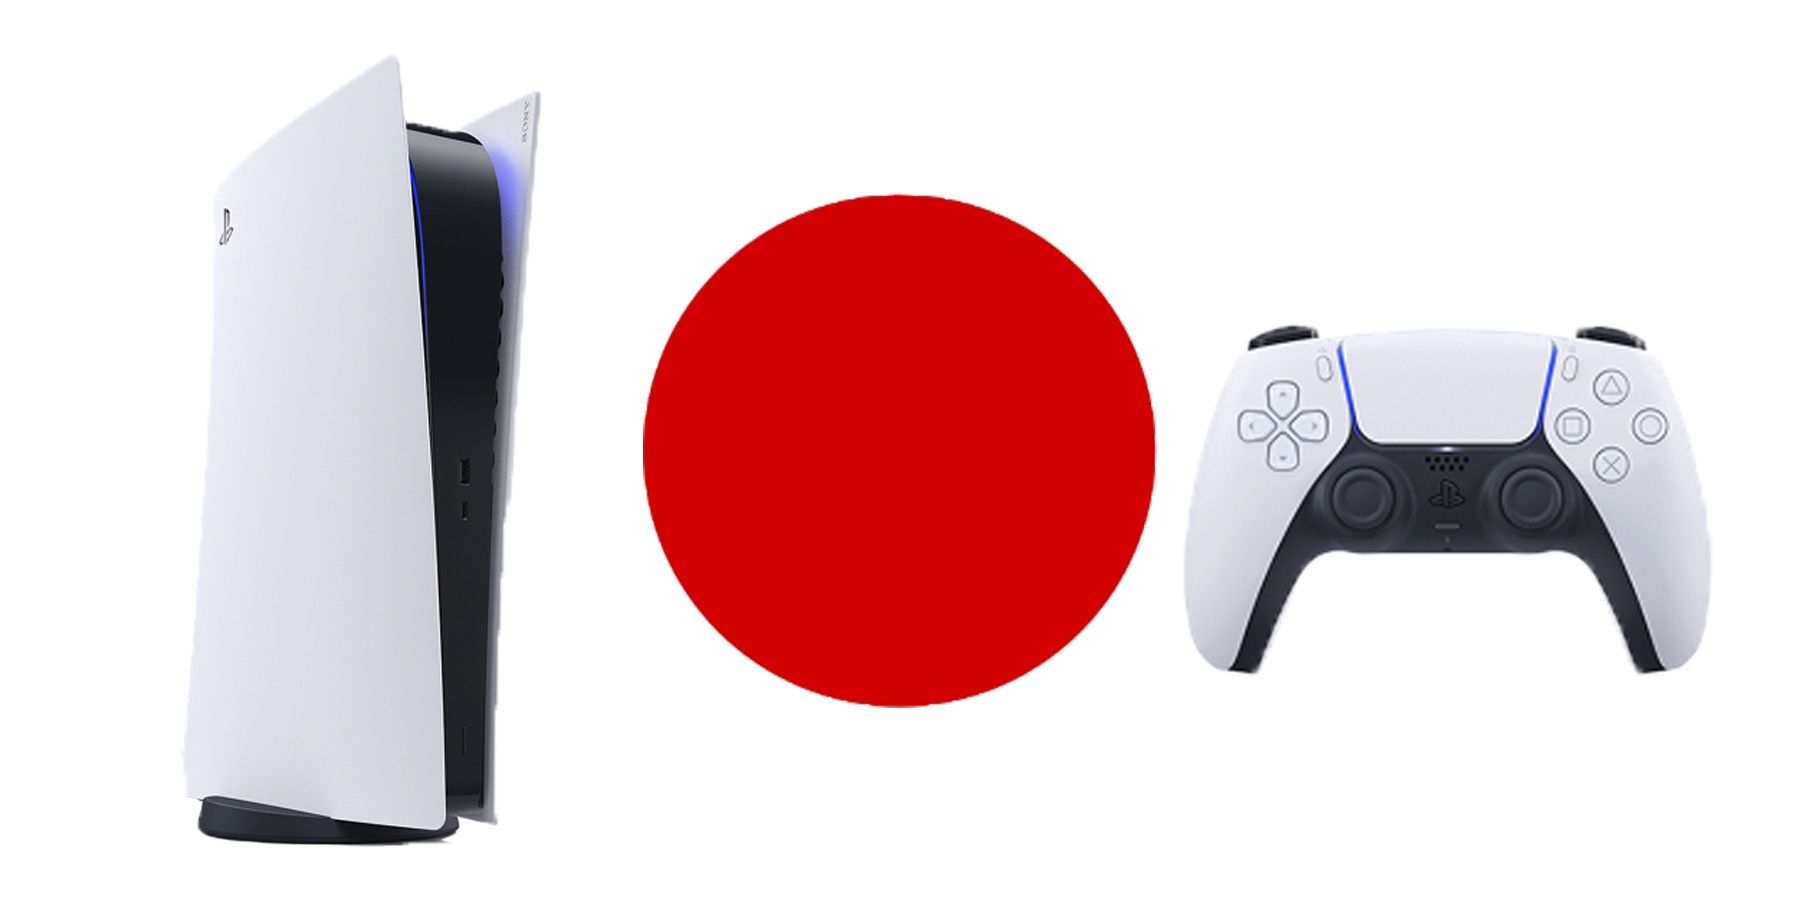 ps5 and dualsense controller on a japan flag